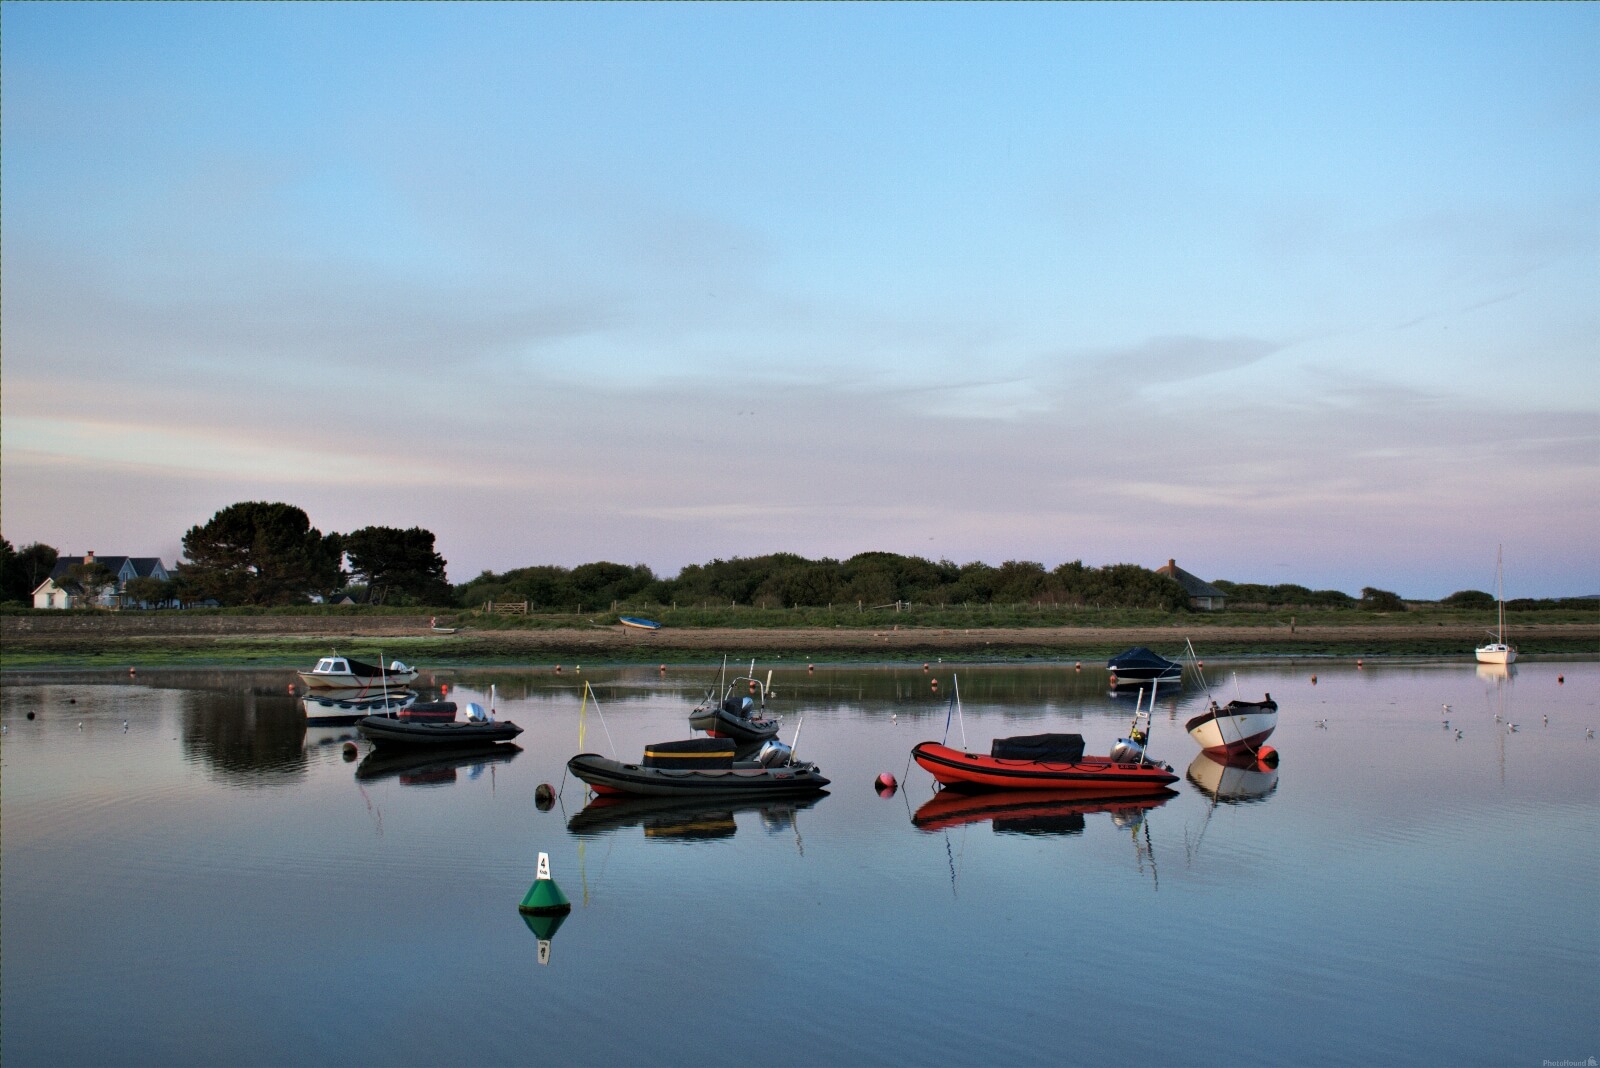 Image of Keyhaven Harbour by michael bennett